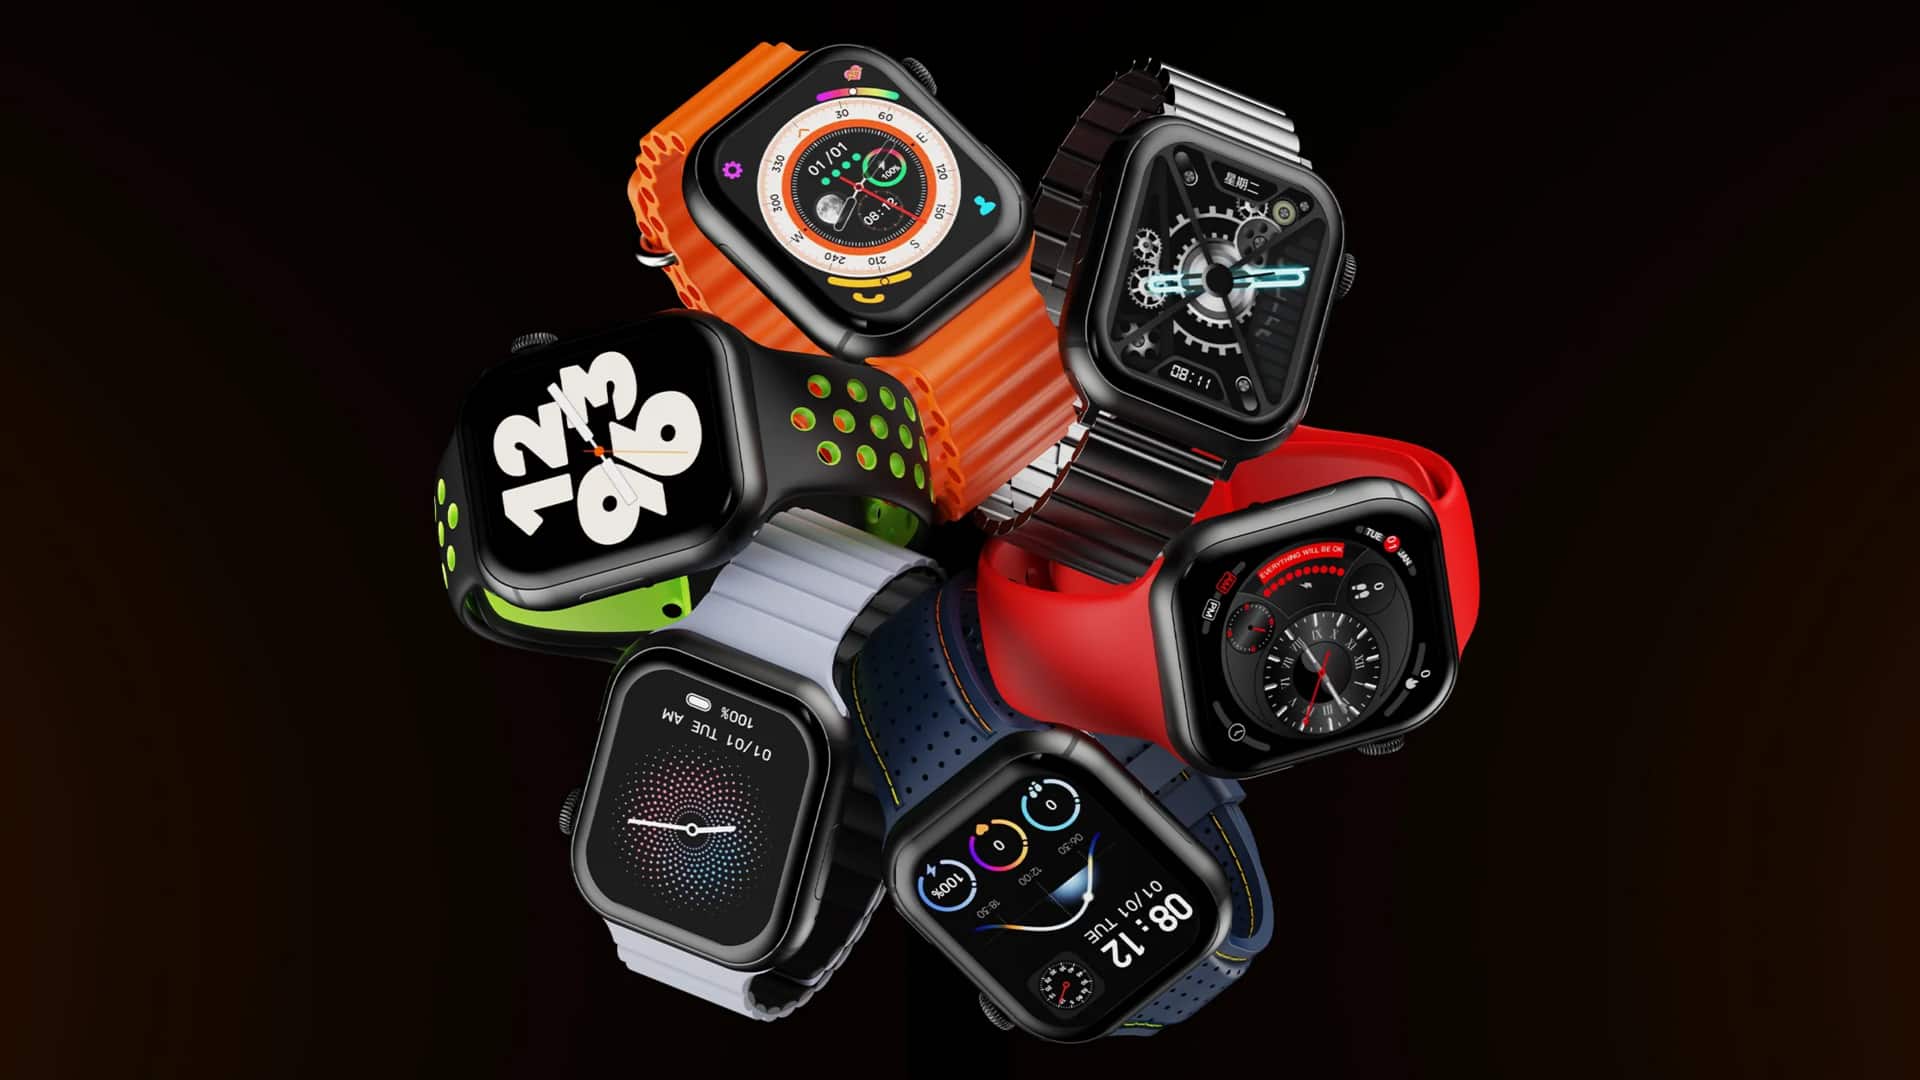 Fire-Boltt launches Android-powered Dream smartwatch with 4G LTE support